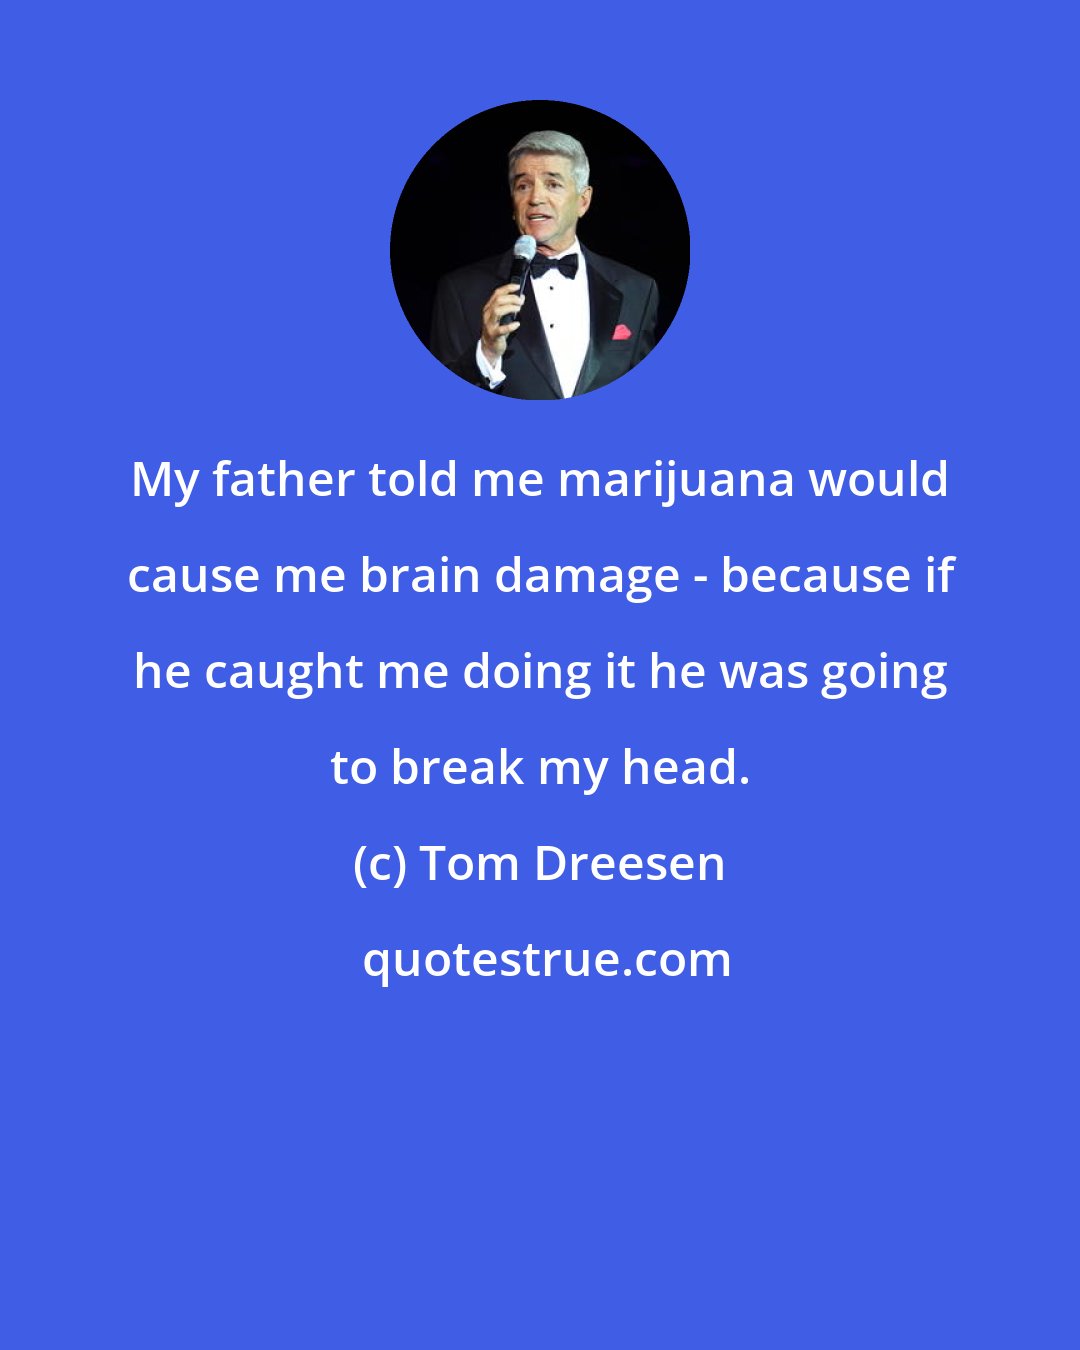 Tom Dreesen: My father told me marijuana would cause me brain damage - because if he caught me doing it he was going to break my head.